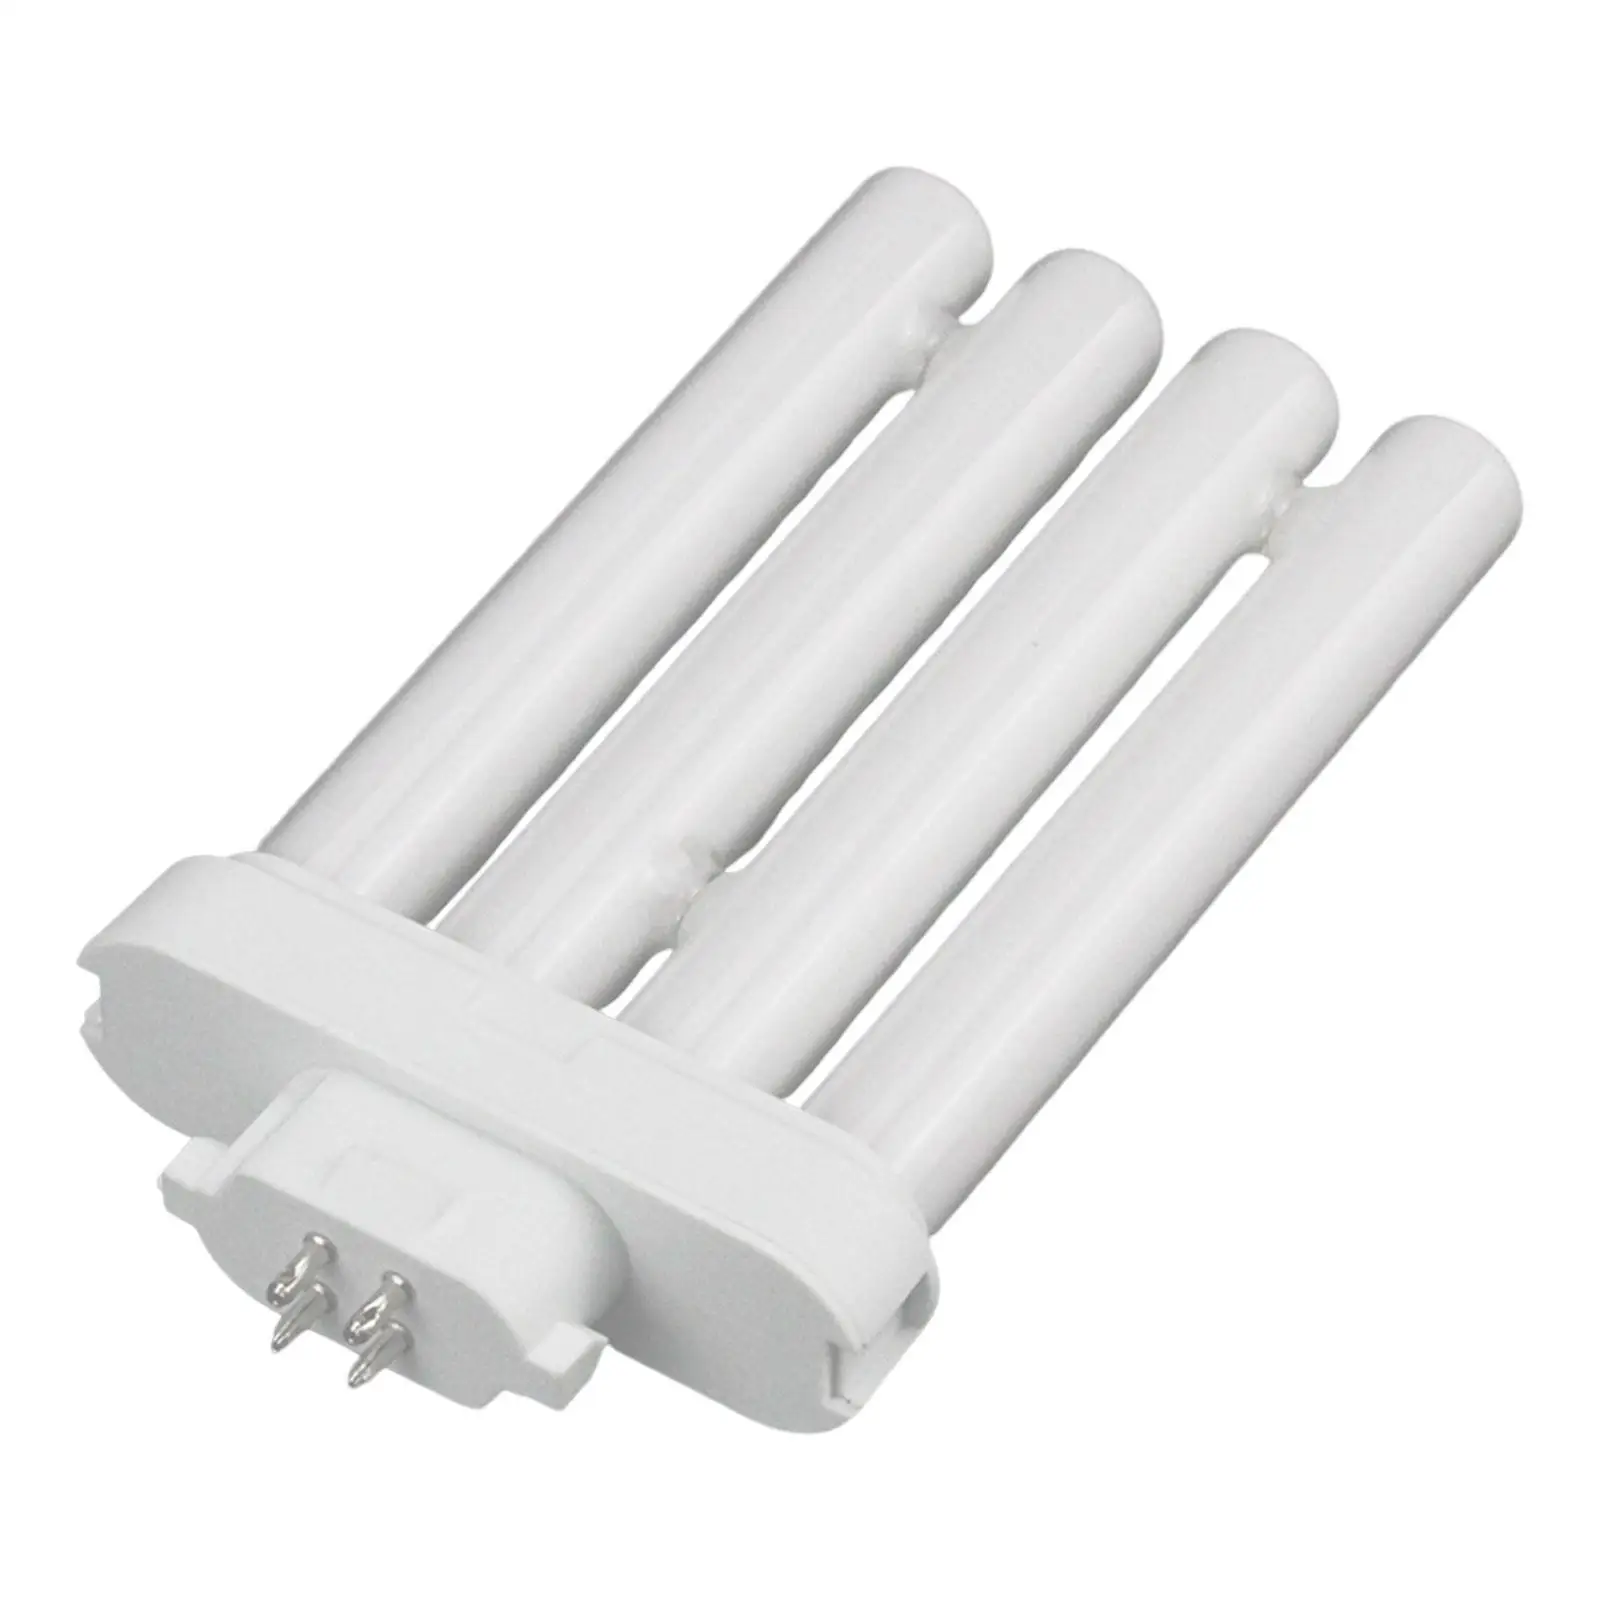 Quad Tube Lamp Unique Fluorescent Bulb Reading Desk Lamp Easy to Install Indoor Tube 4 Pin Compact Fluorescent Plug in Lamp